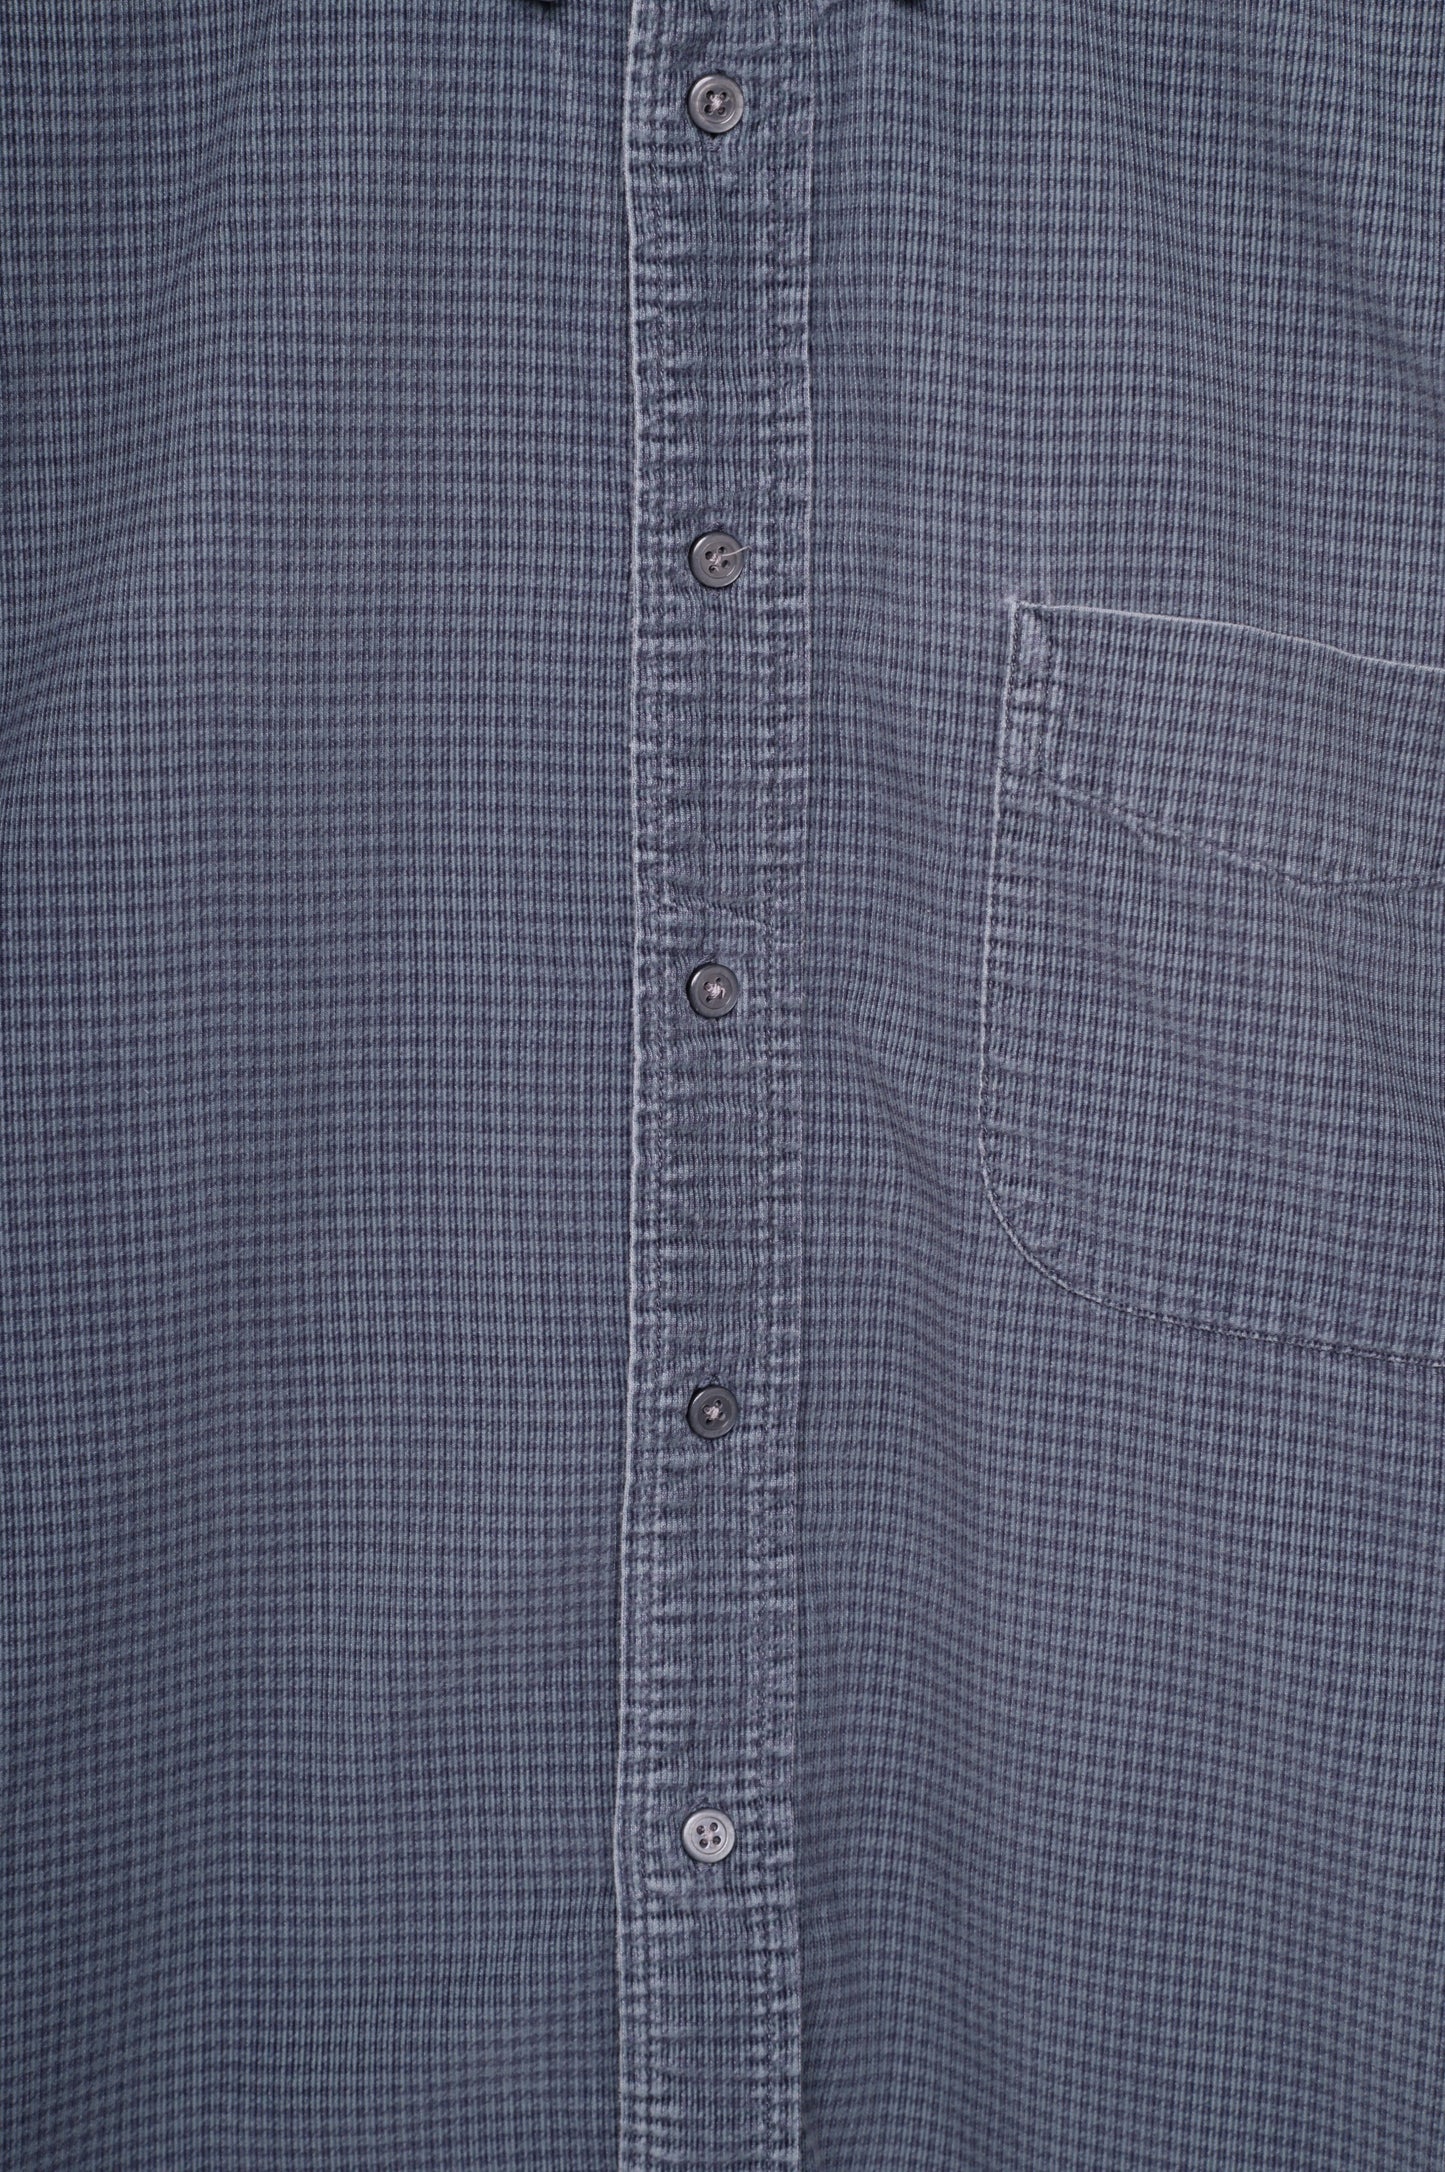 Soft Ribbed Button Down